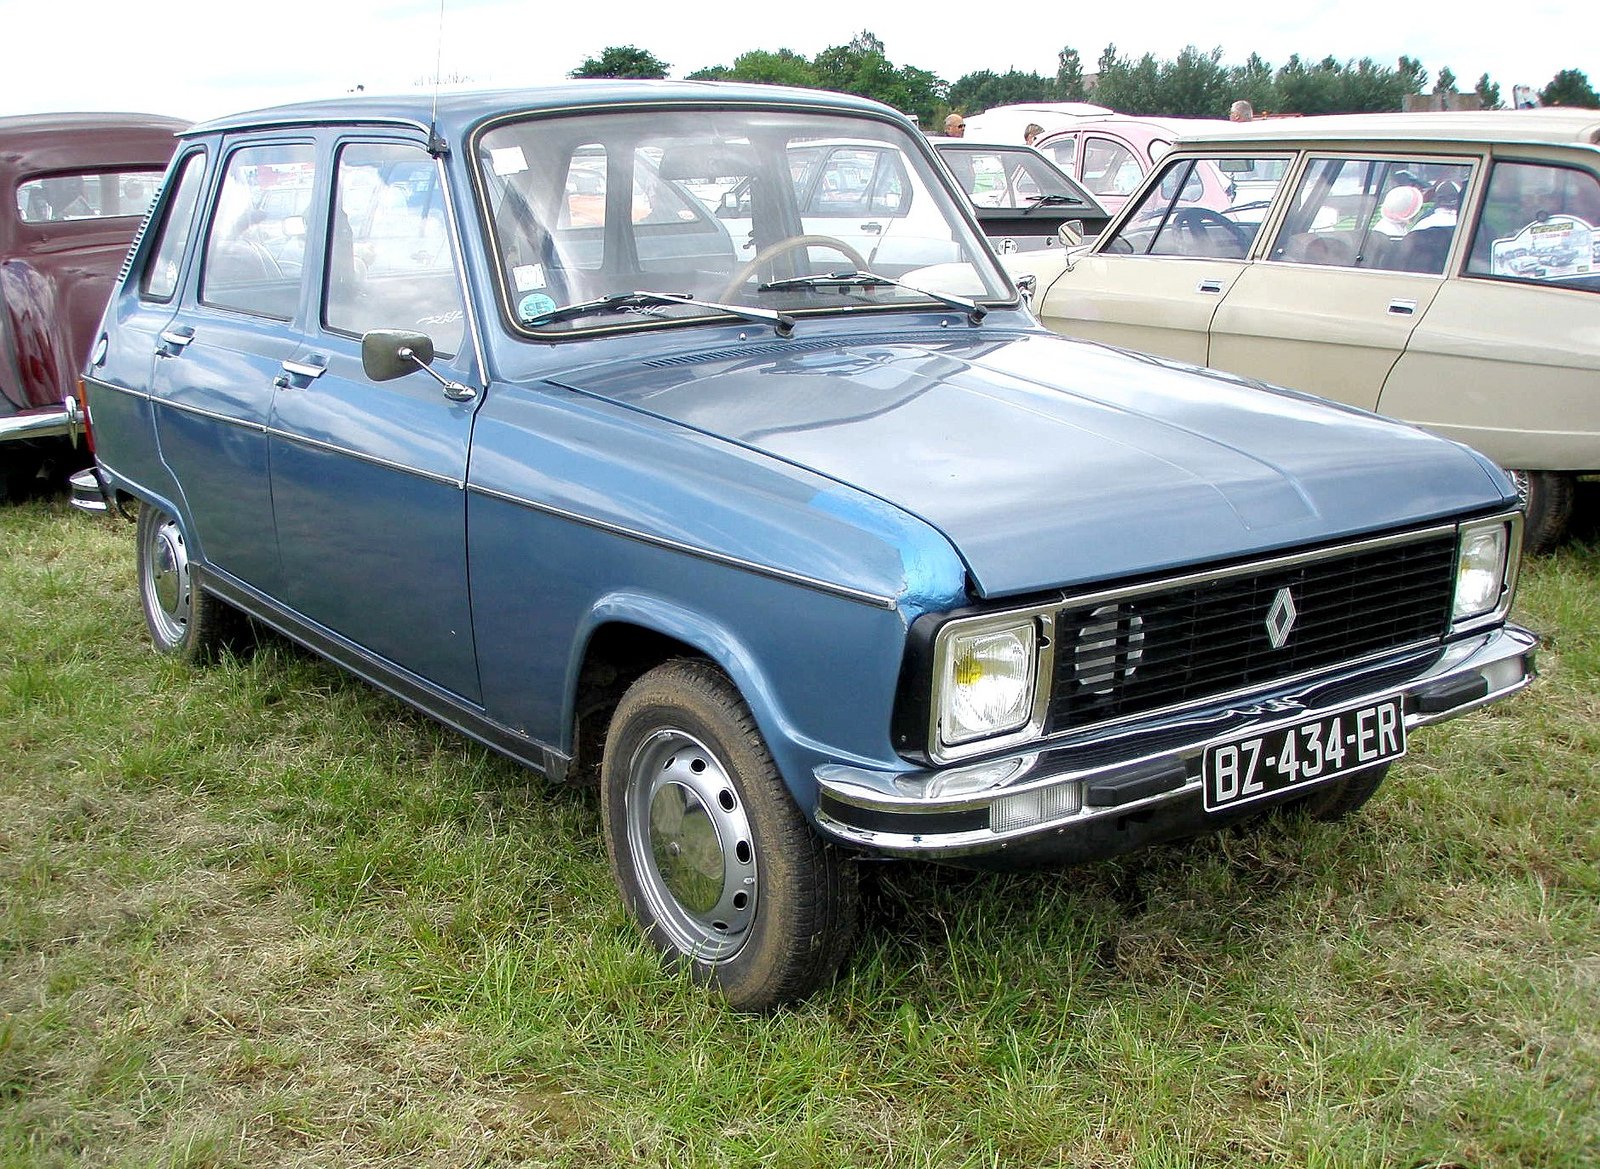 Renault Renault 6 Cars Classic French Wallpapers Hd Desktop And Mobile Backgrounds